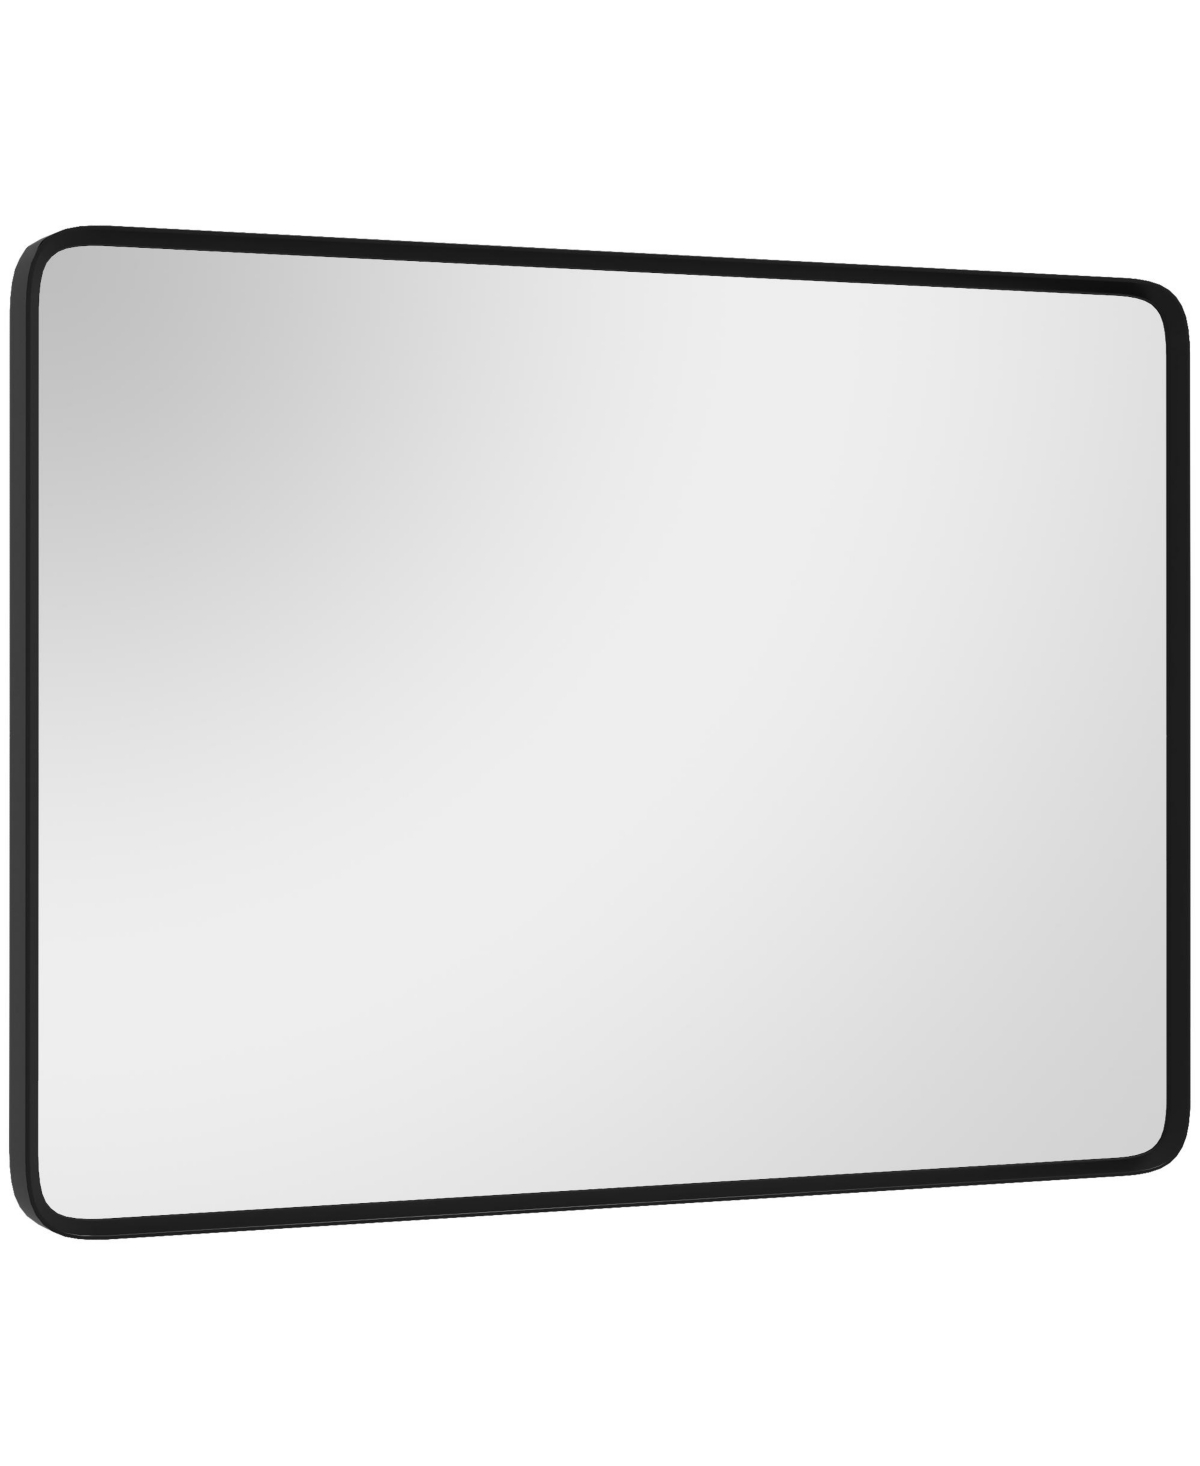 39.75 x 29.75 Wall-Mounted Living Room Rectangle Mirror - Black